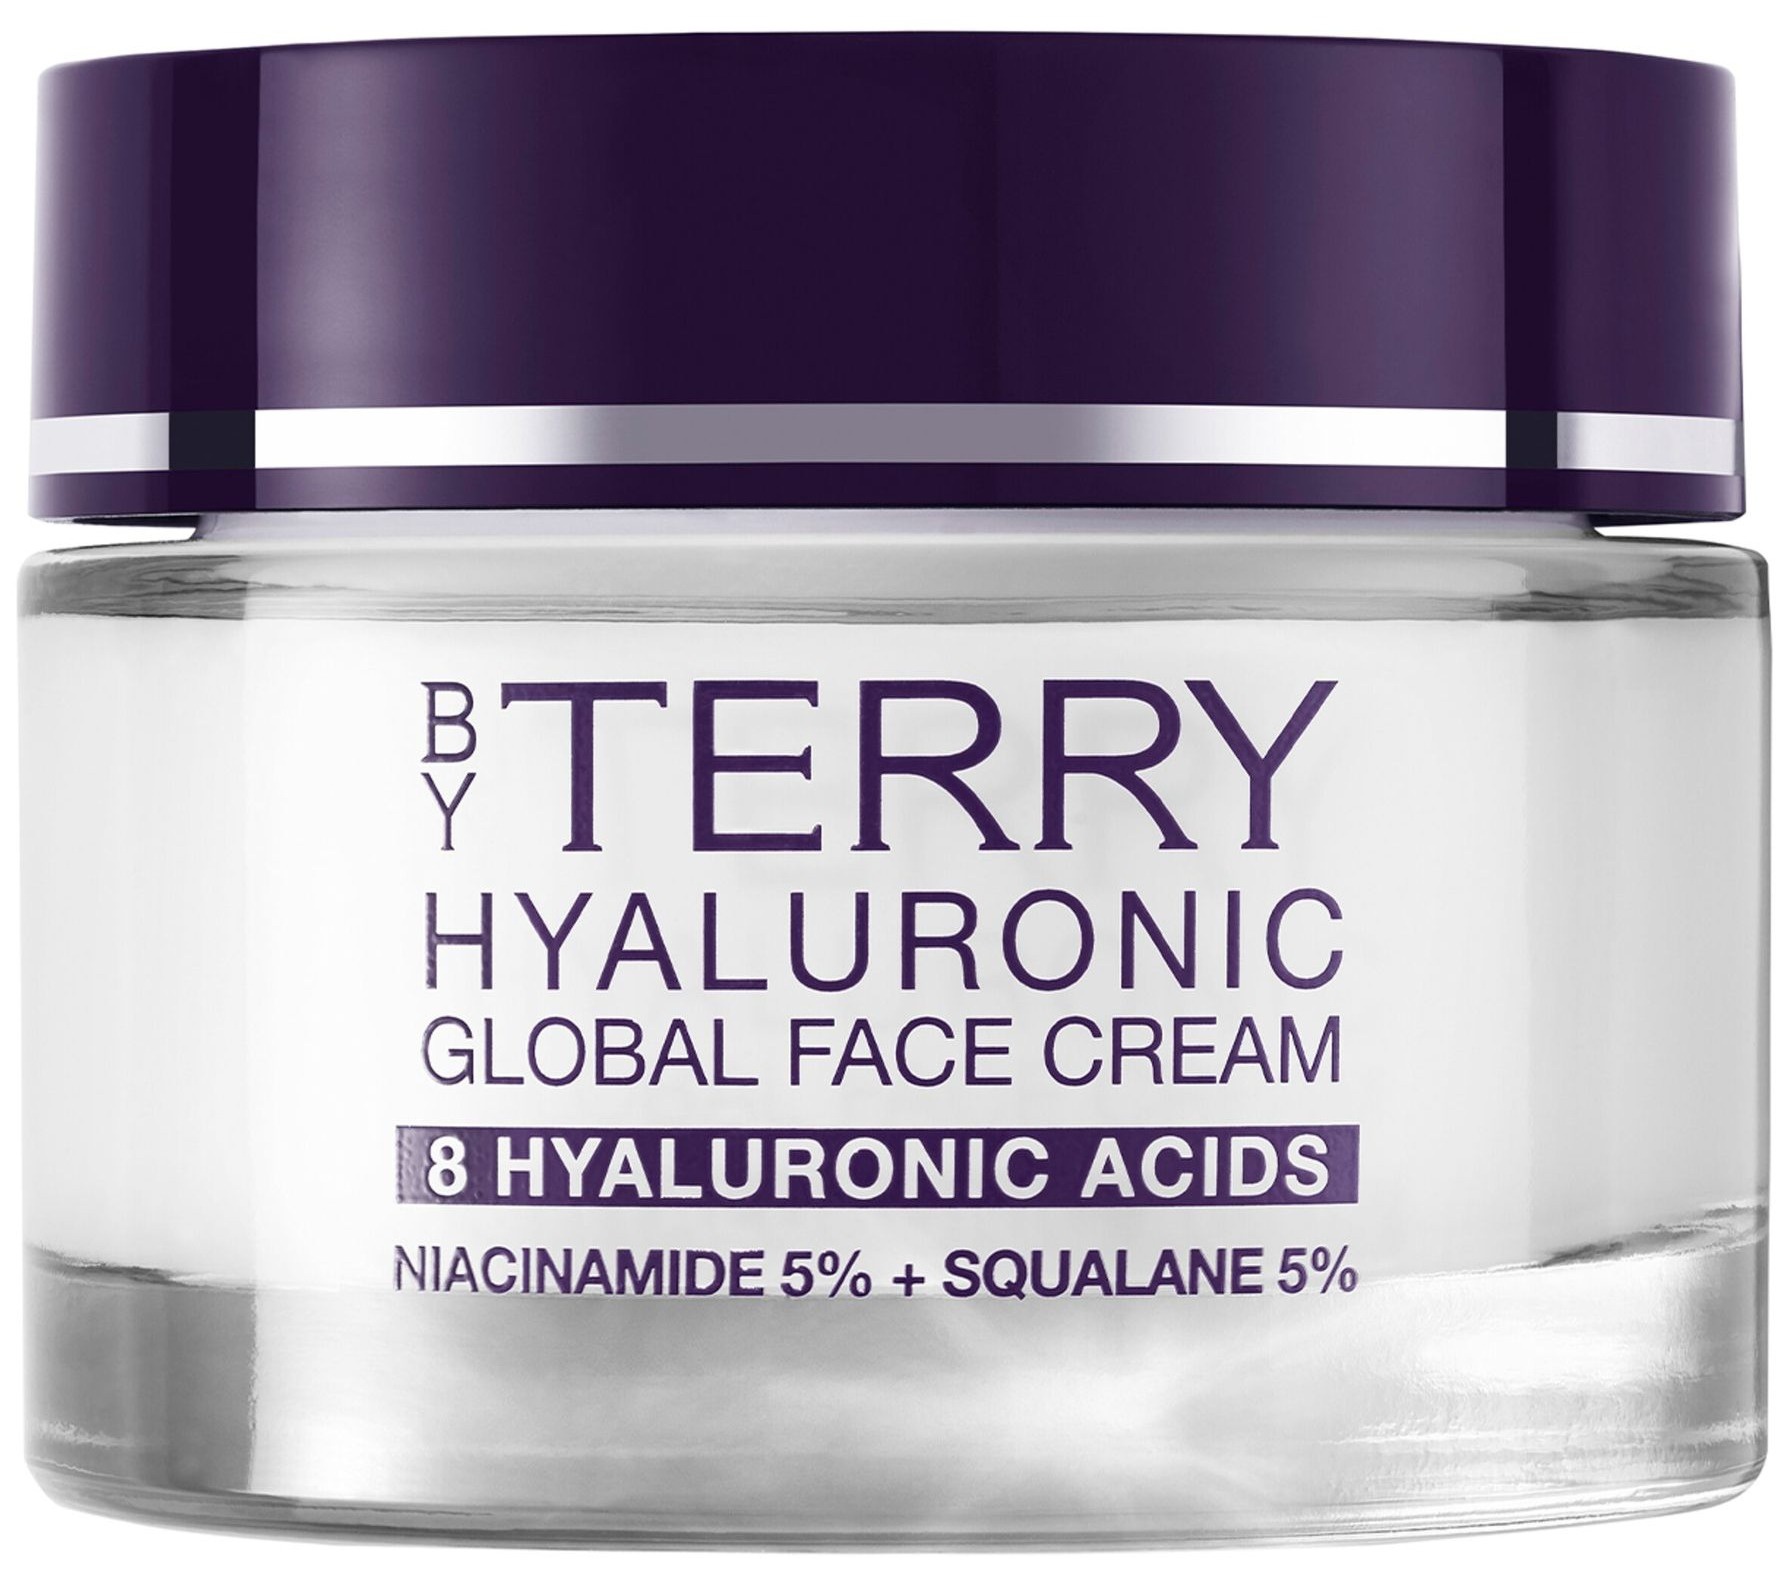 By Terry Hyarulonic Global Face Cream